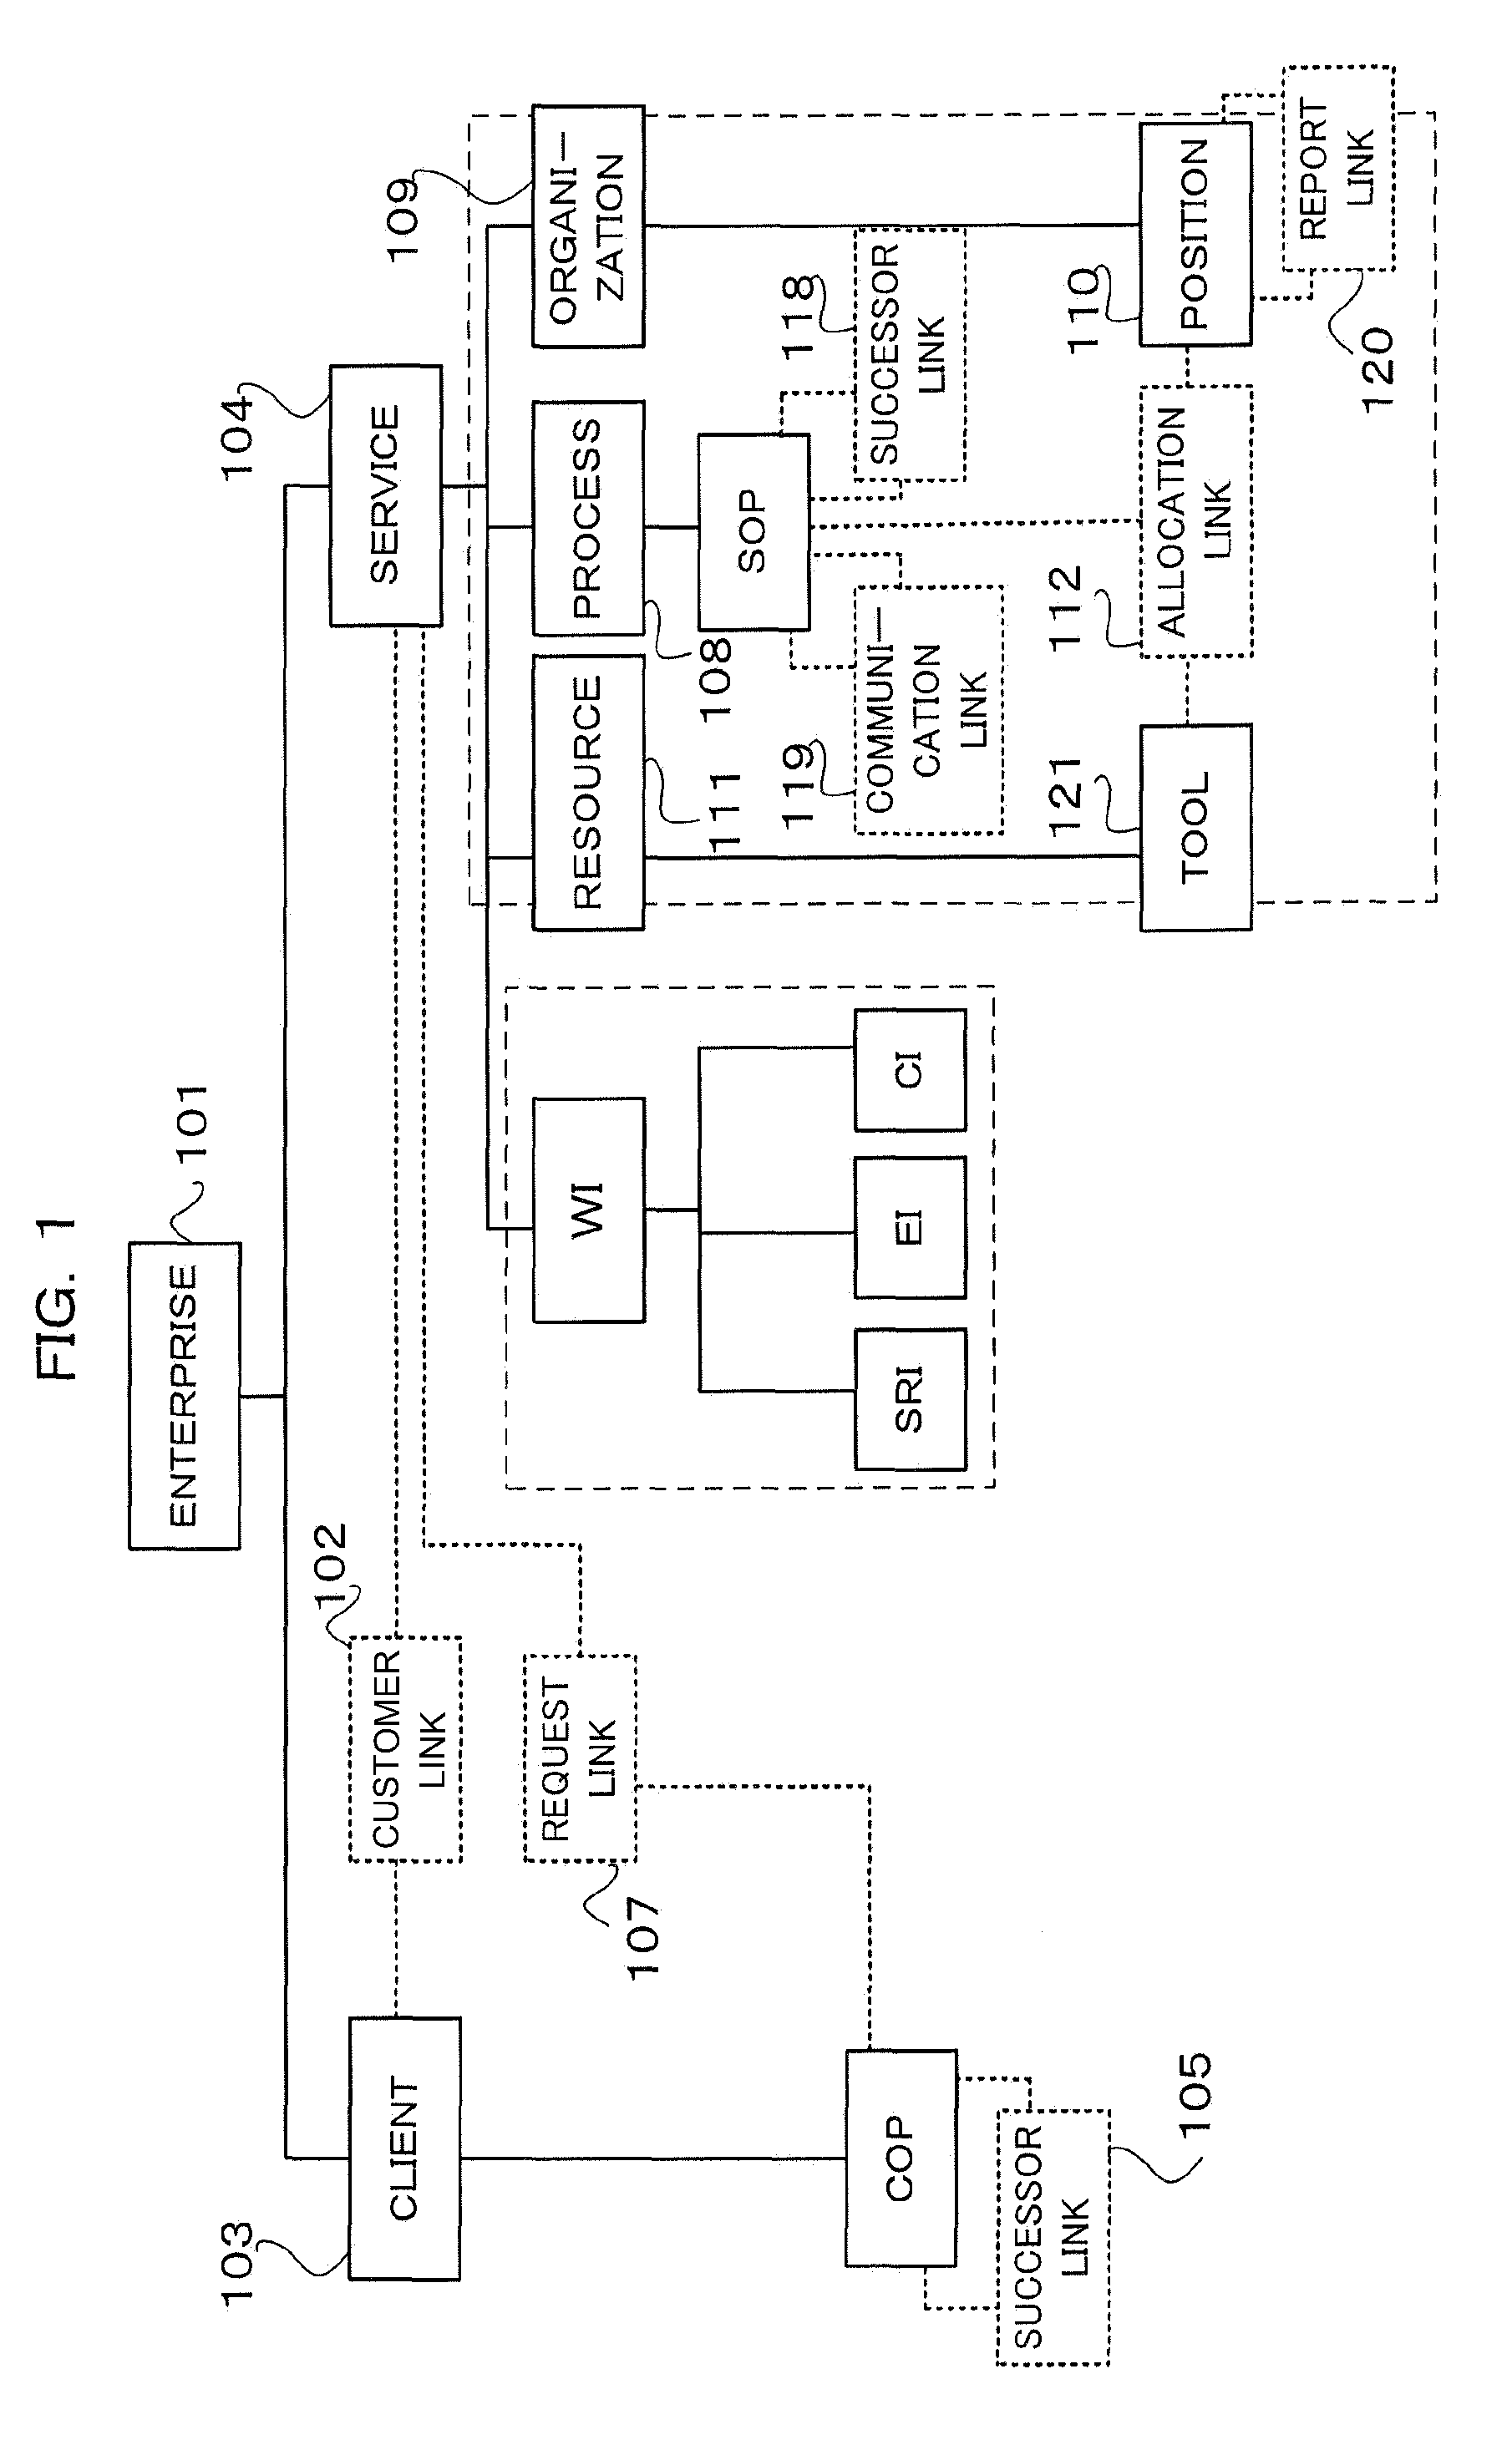 Process management support system and simulation method